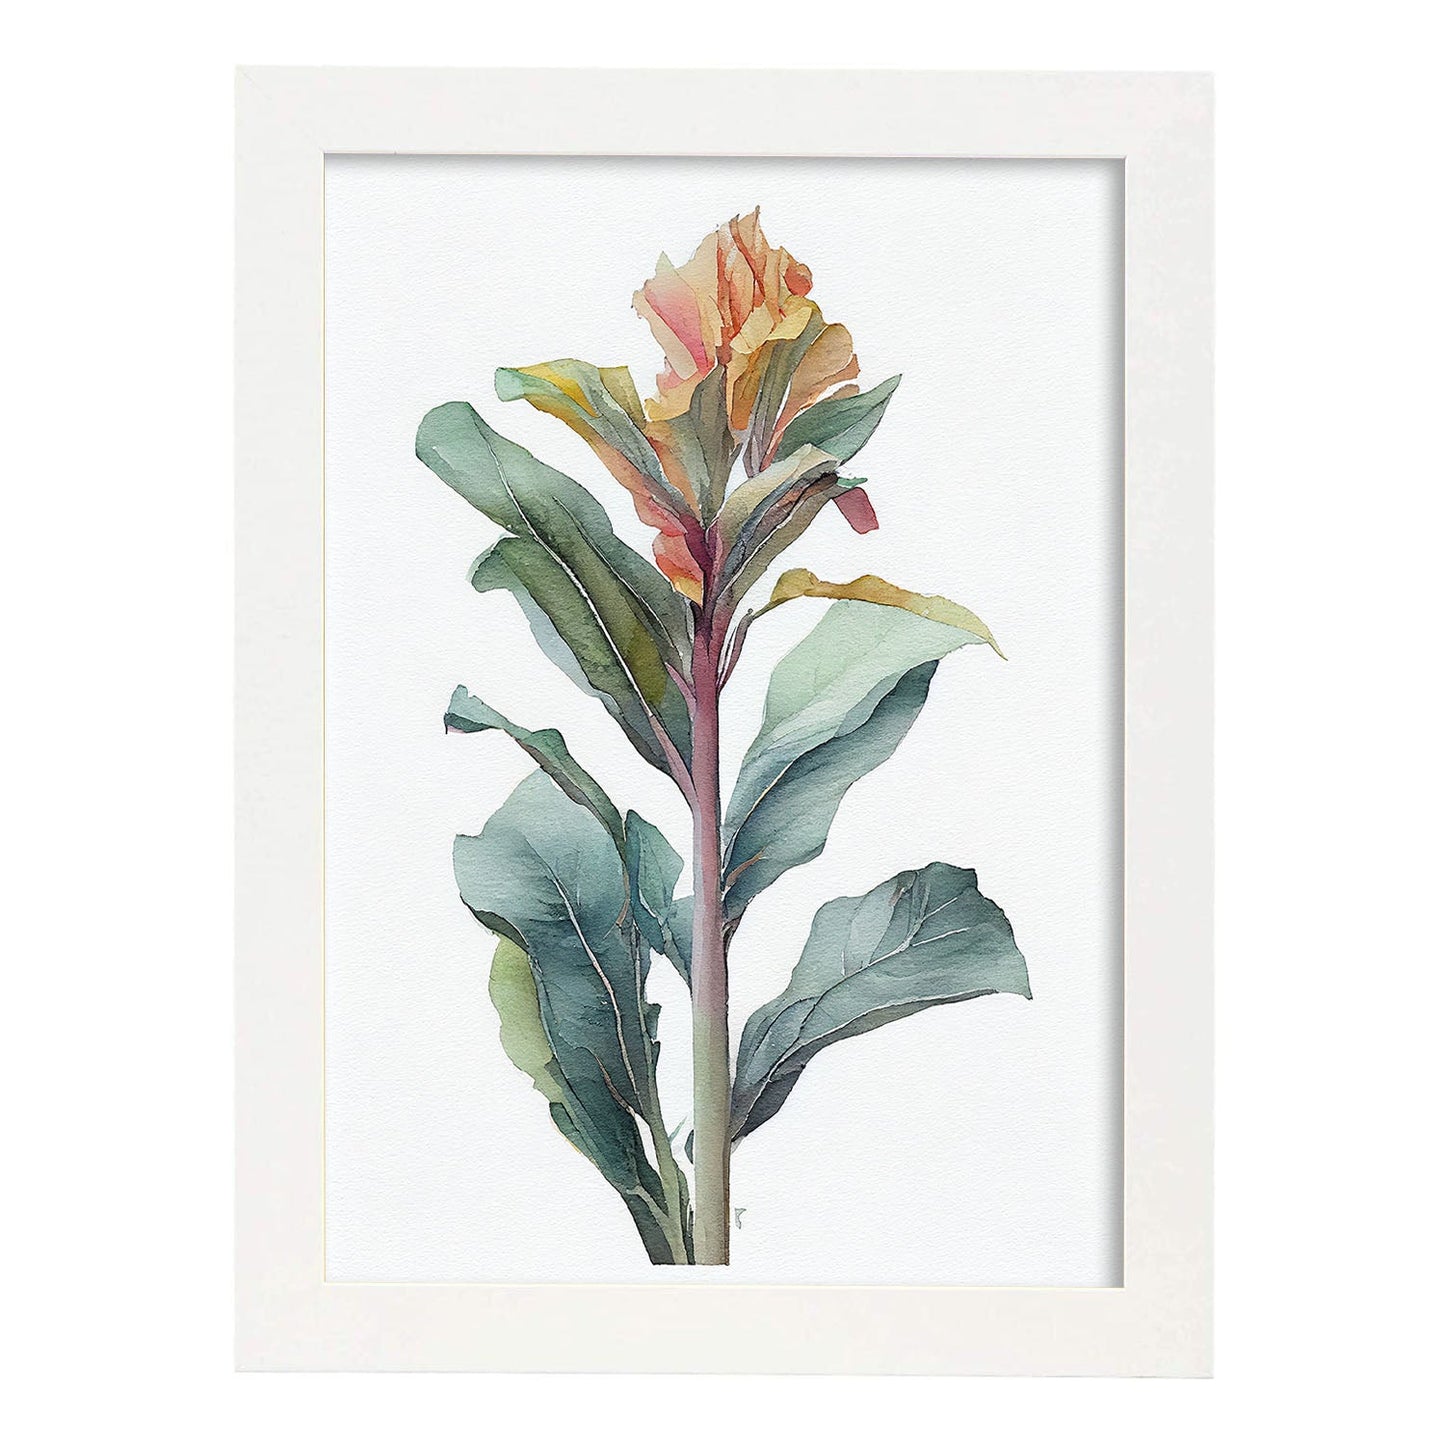 Nacnic watercolor minmal Canna_2. Aesthetic Wall Art Prints for Bedroom or Living Room Design.